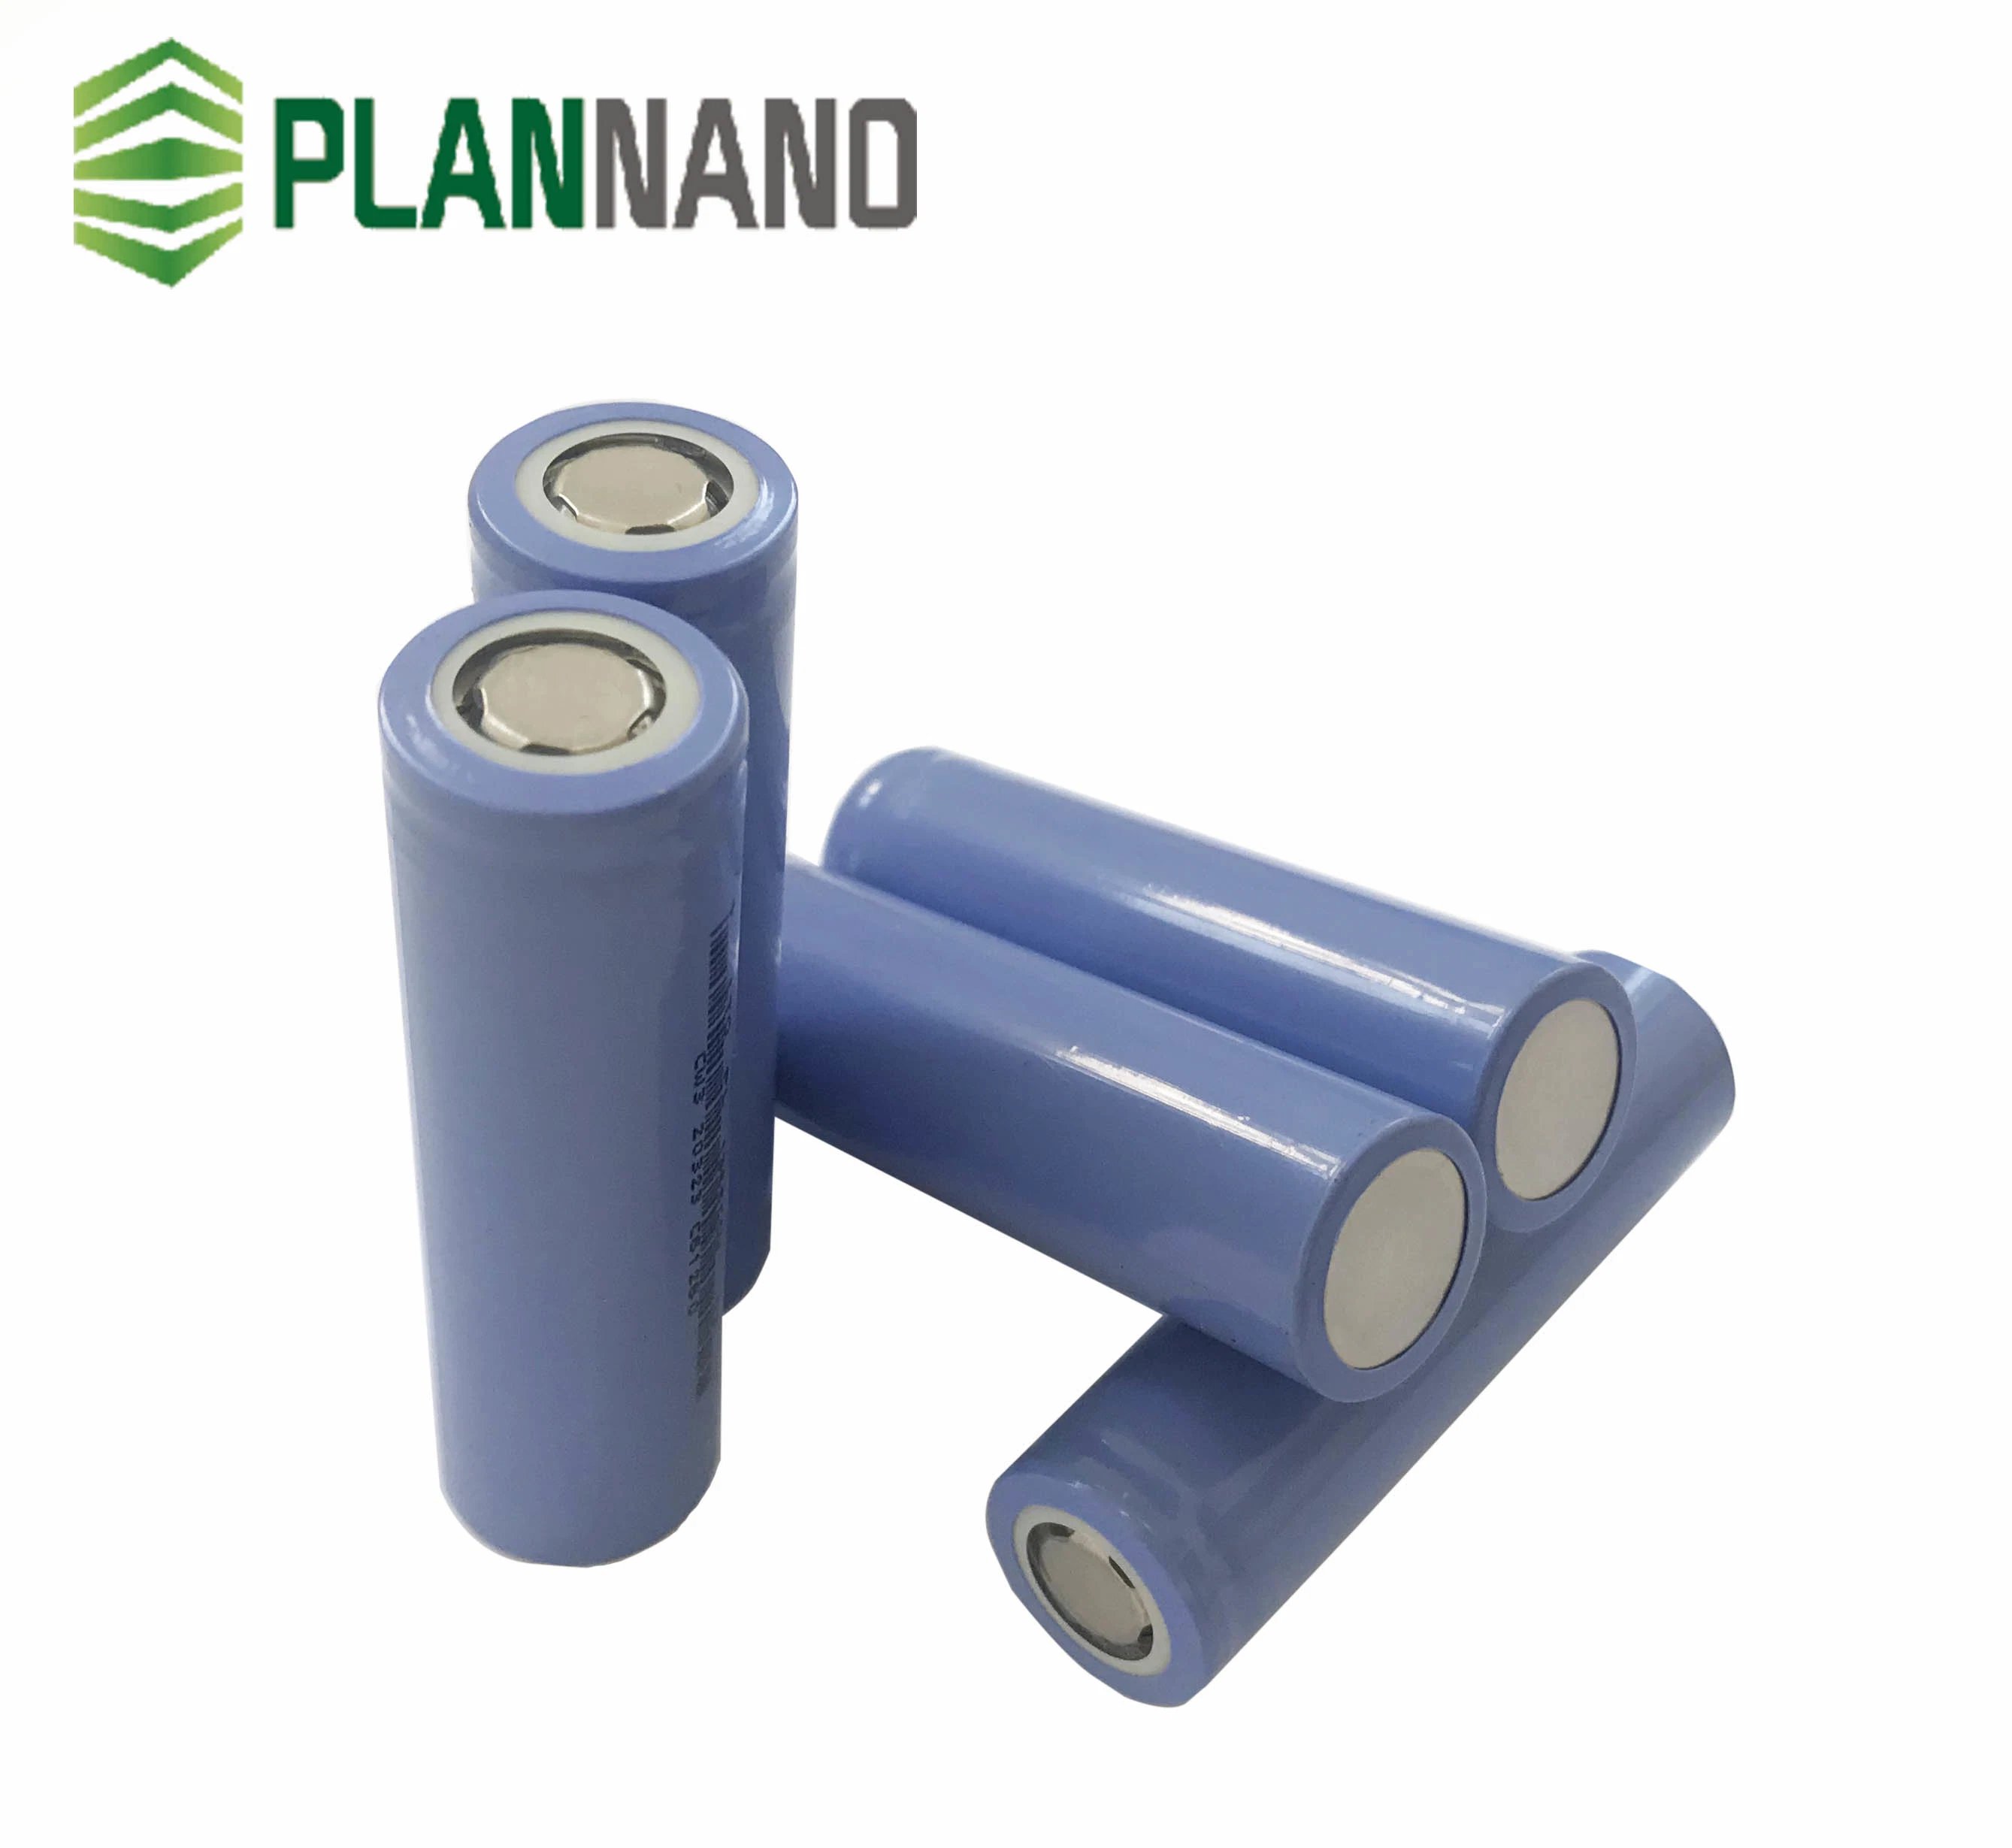 CE Certificated Plannano Lithium Titanate Battery 3.6V 3300mAh 3c Discharge 18650 Lto Cell for Electric Scooter or Solar Power Supply